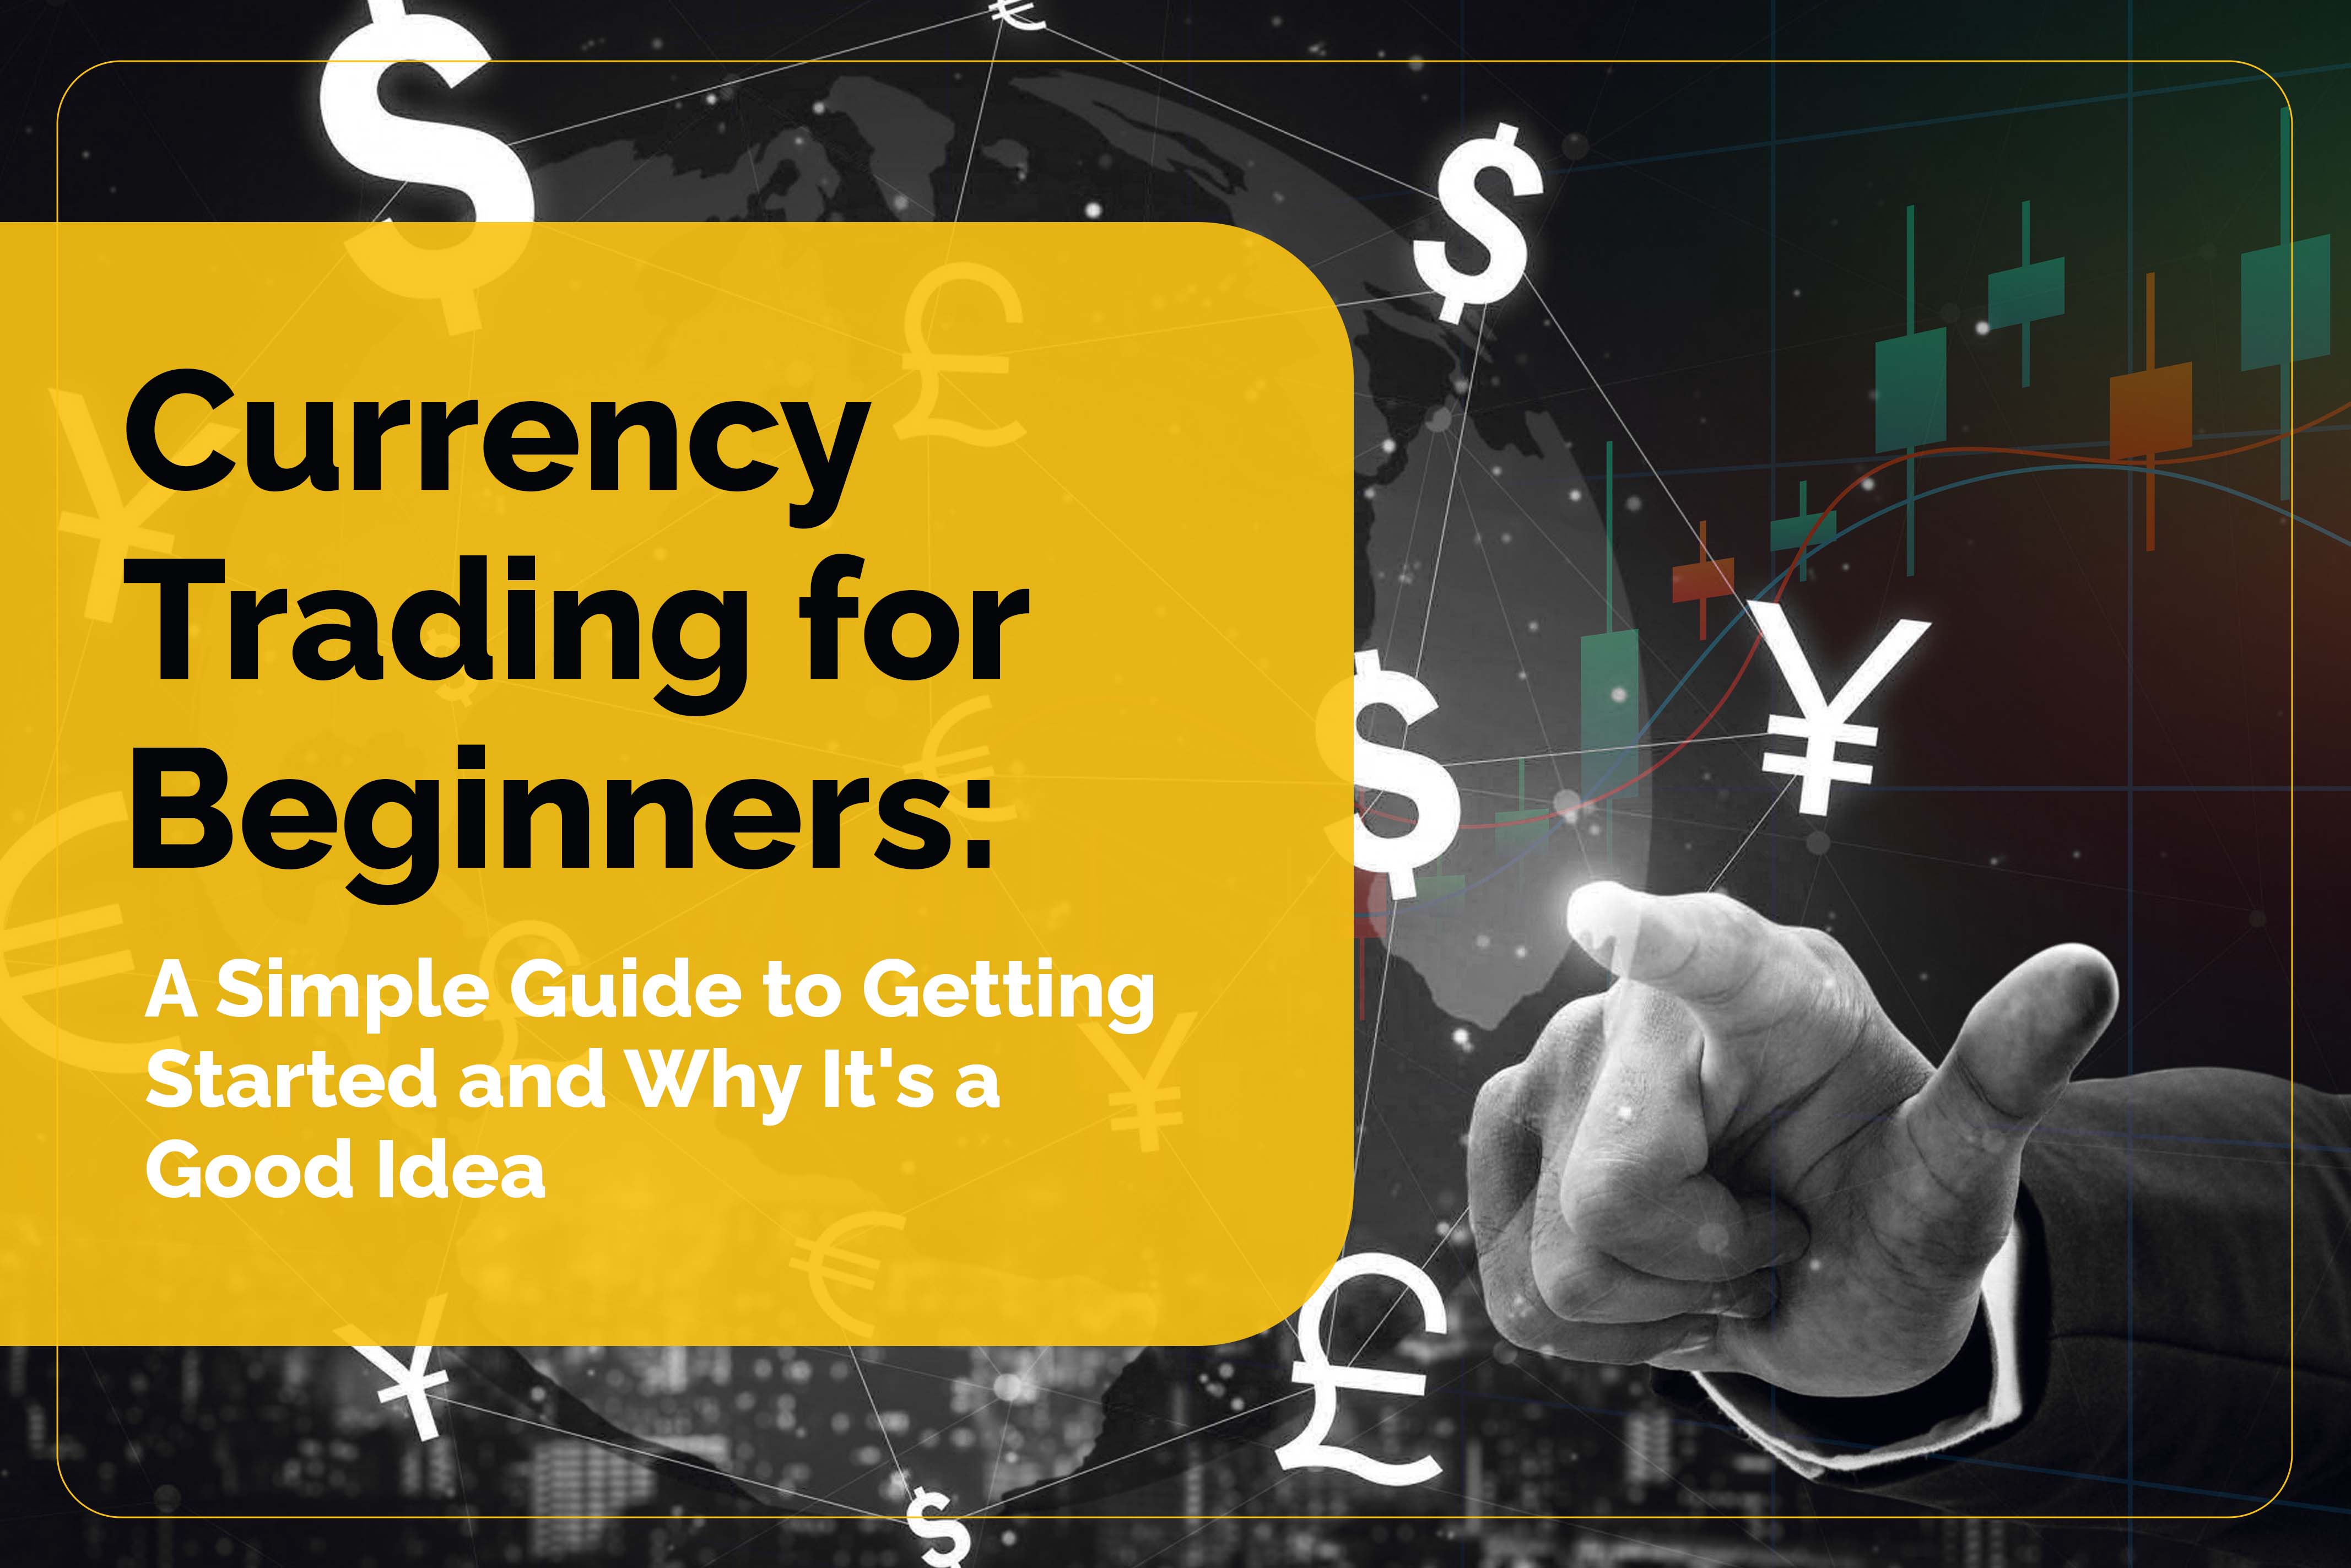 Currency Trading for Beginners: A Simple Guide to Getting Started and Why It is a Good Idea